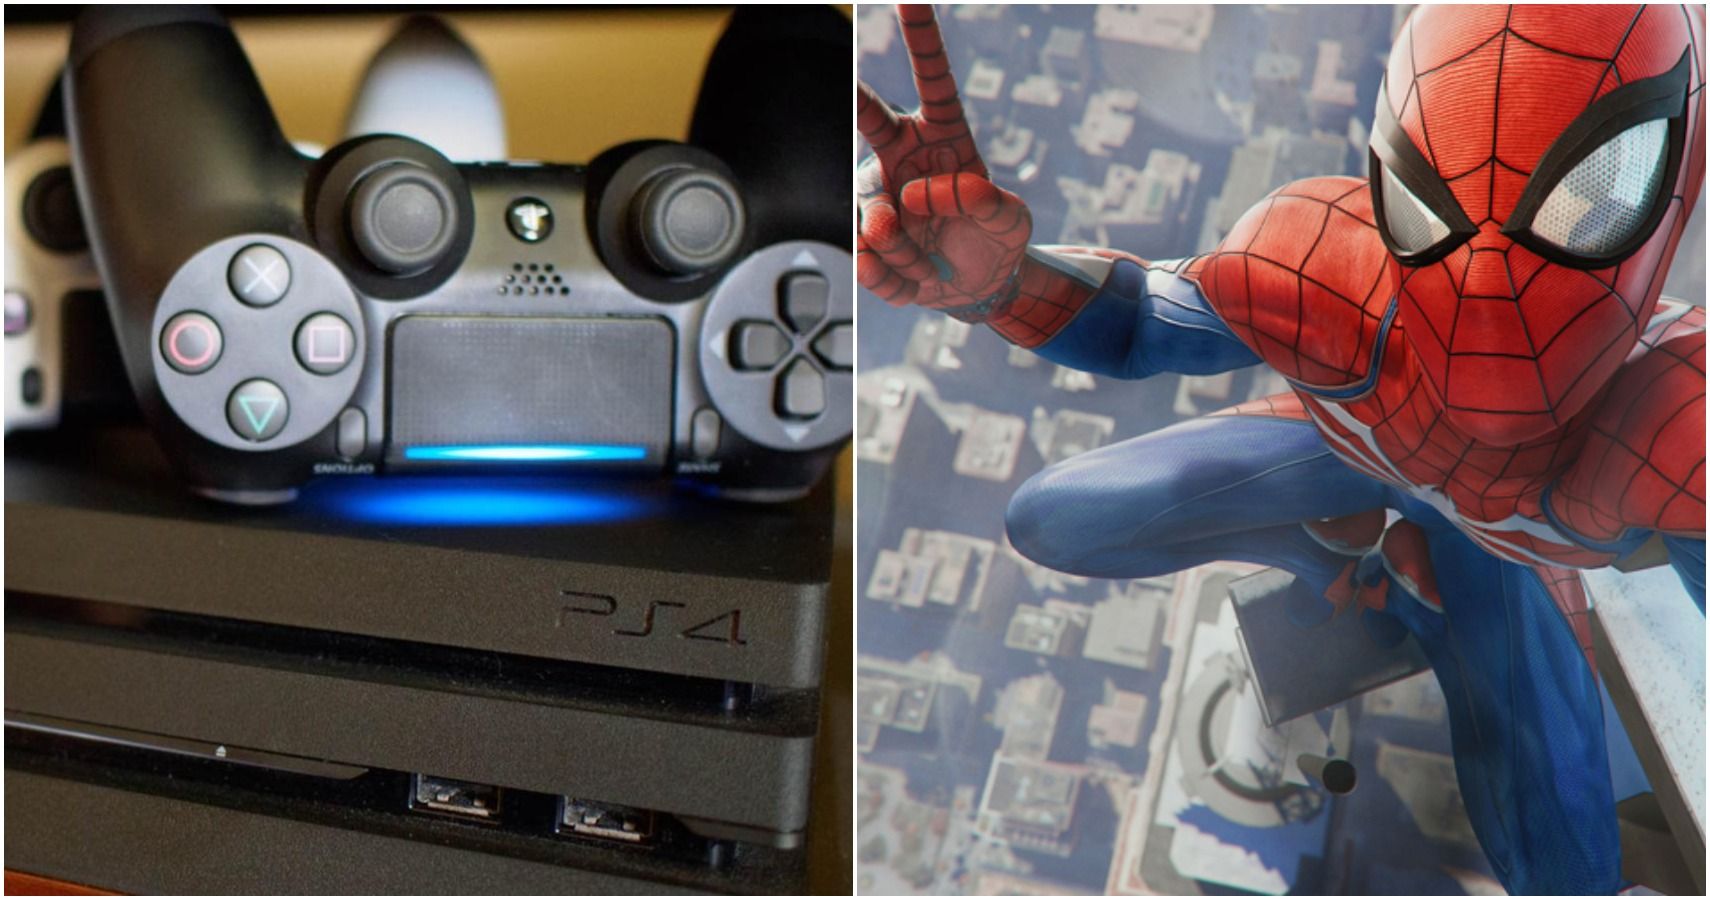 The Only 2 Near-Perfect PS4 Games, According to Metacritic